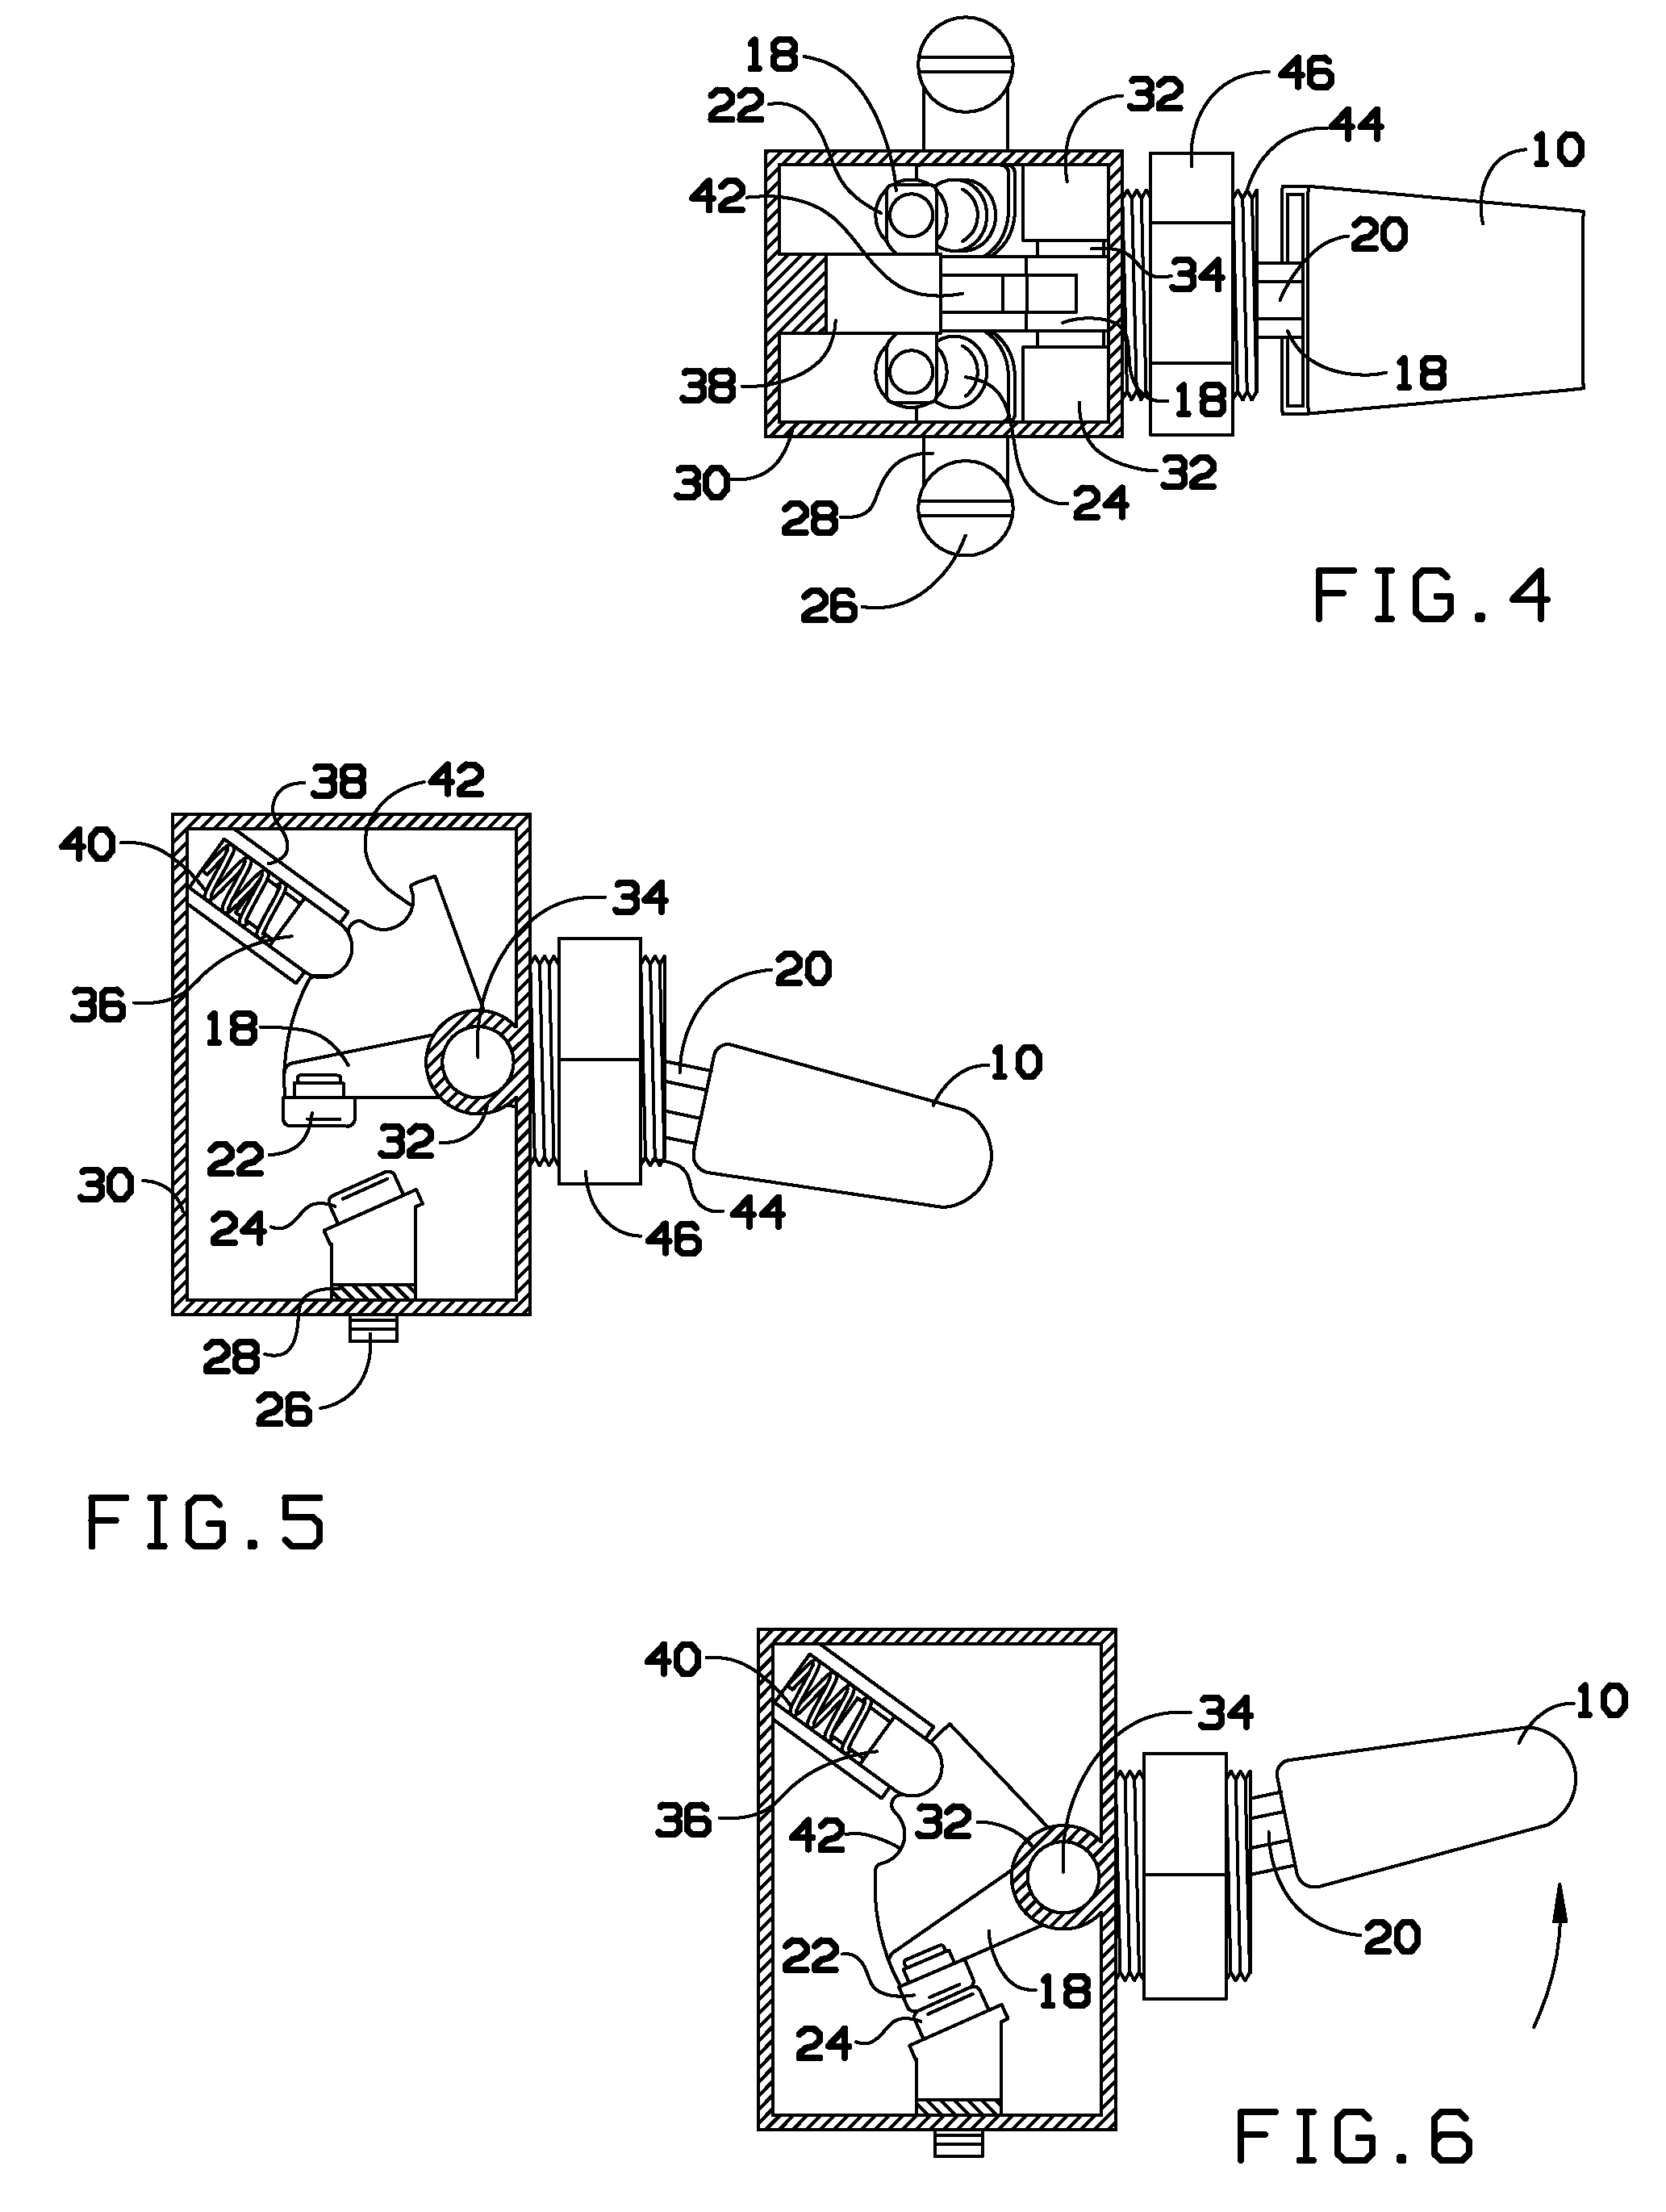 Electrical switch with built in fuse